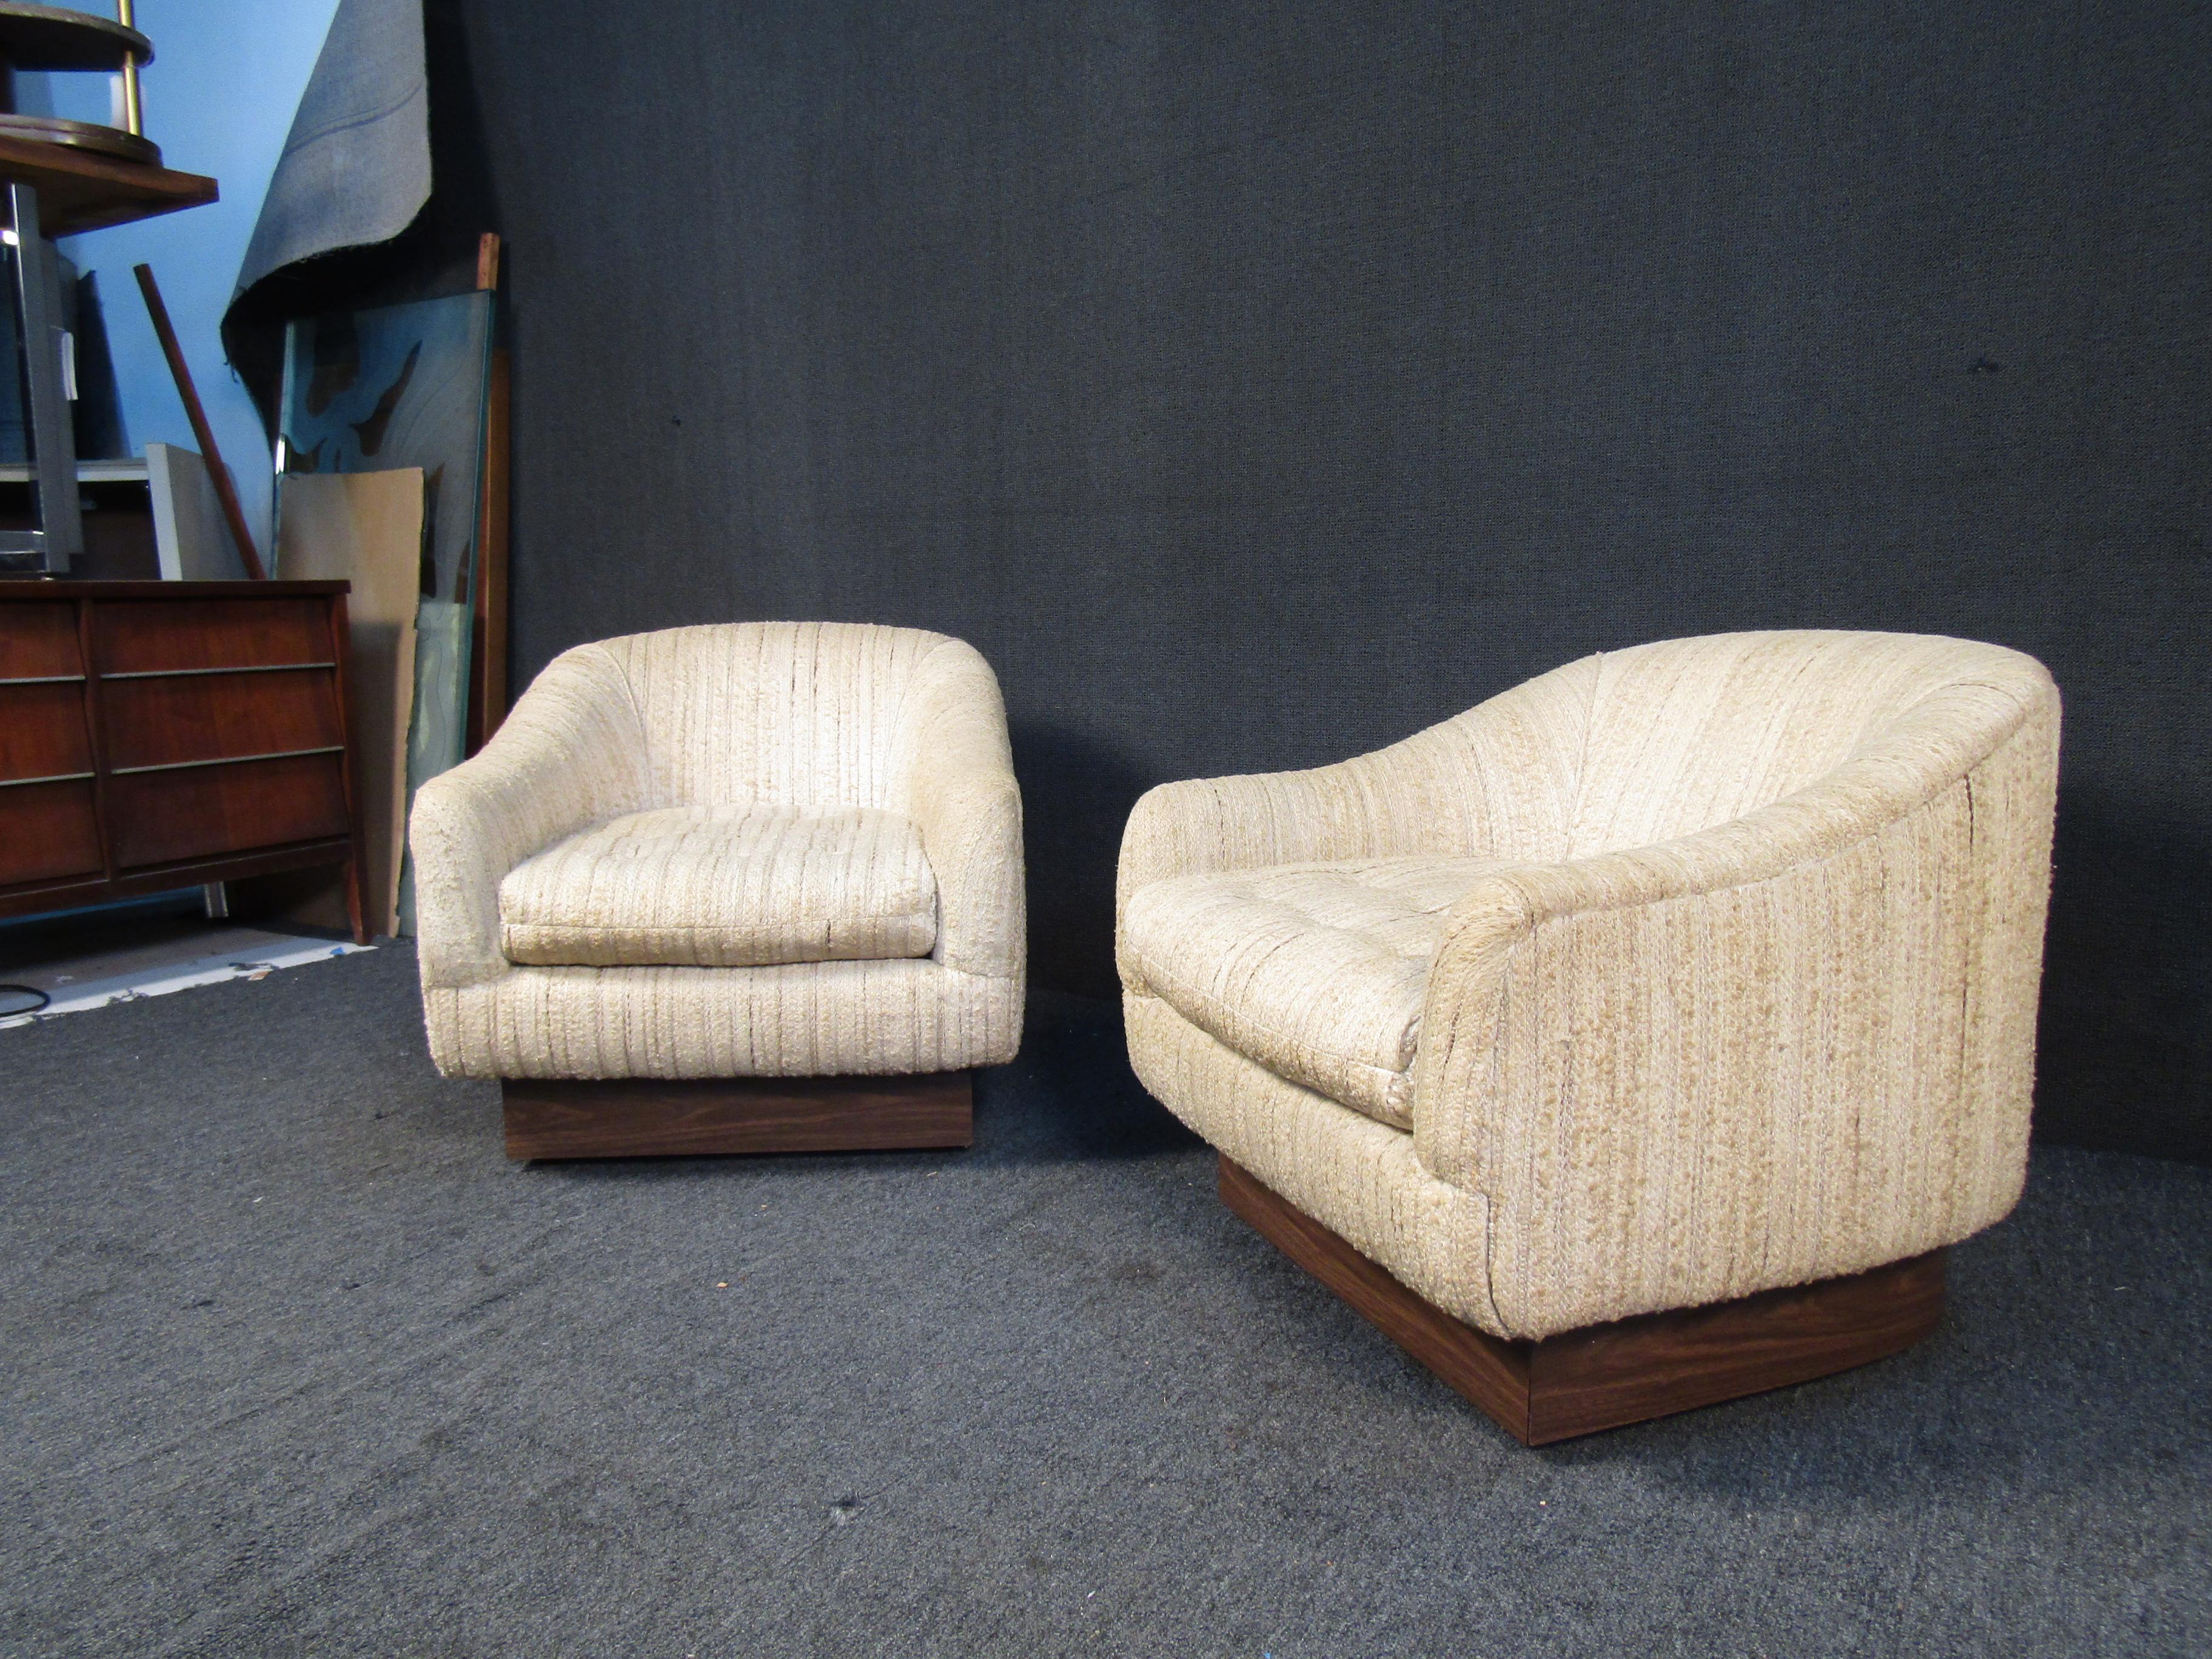 20th Century Mid-Century Modern Upholstered Club Chairs